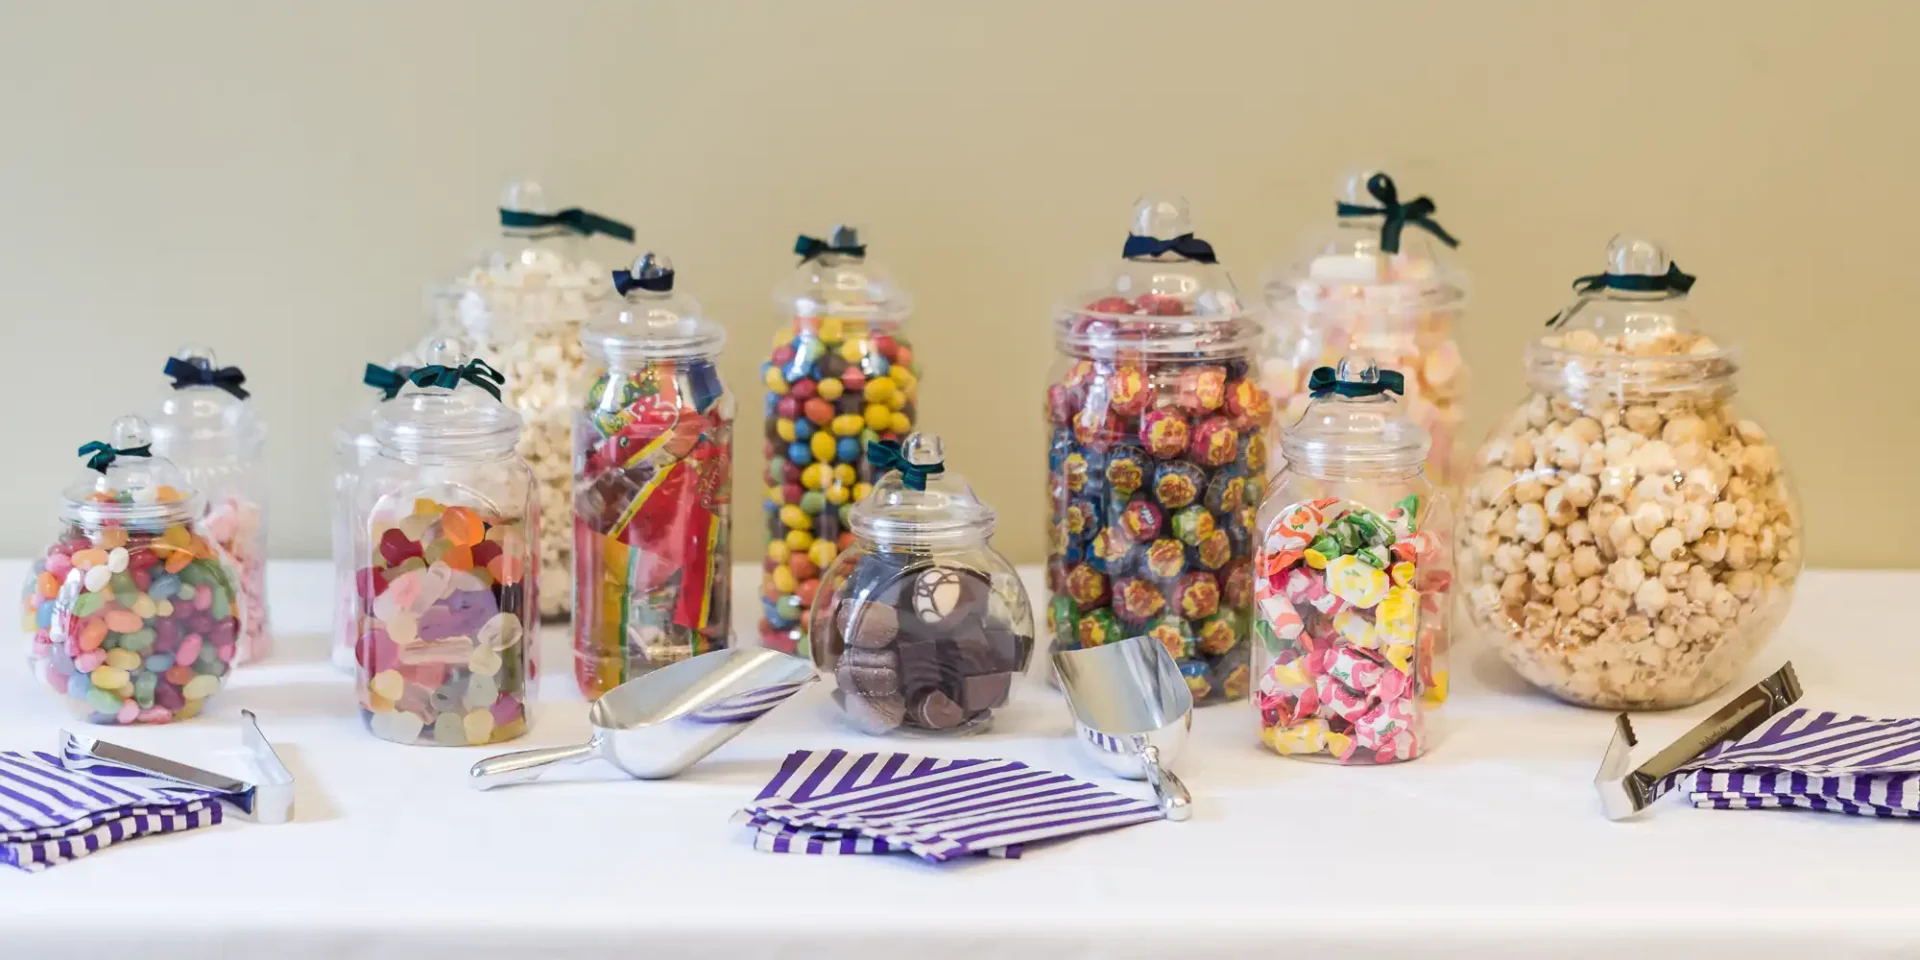 A variety of candies in glass jars arranged on a table with metal scoops and striped napkins.